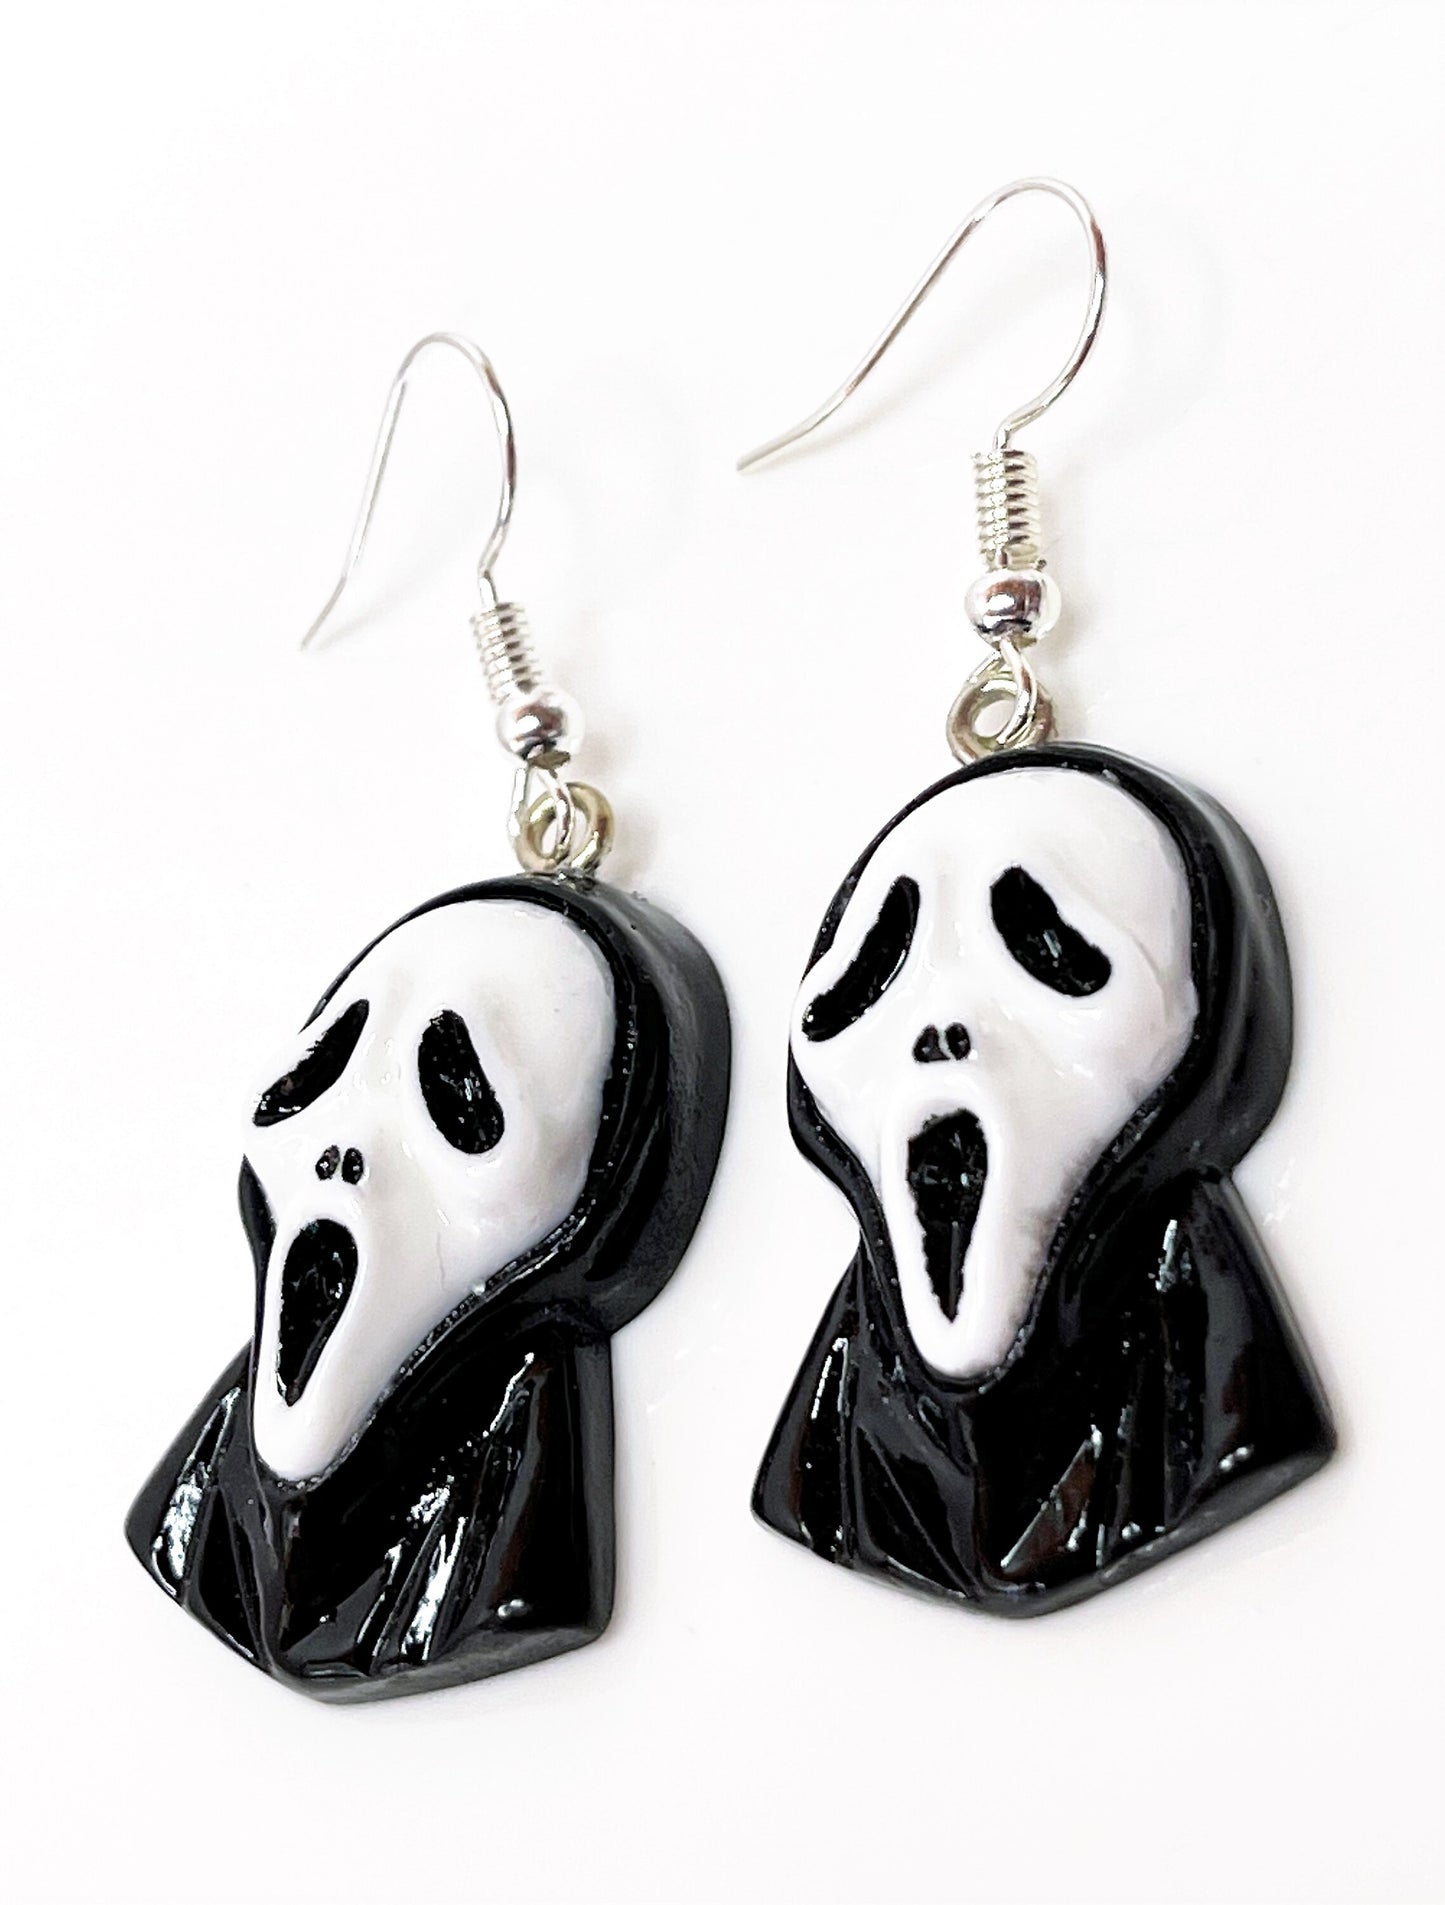 Scream Ghost Face Earrings, Silver Plated, Sterling Silver, Novelty Charm Dangles, Funky Resin Drops, Earrings for Women, Gothic Drops